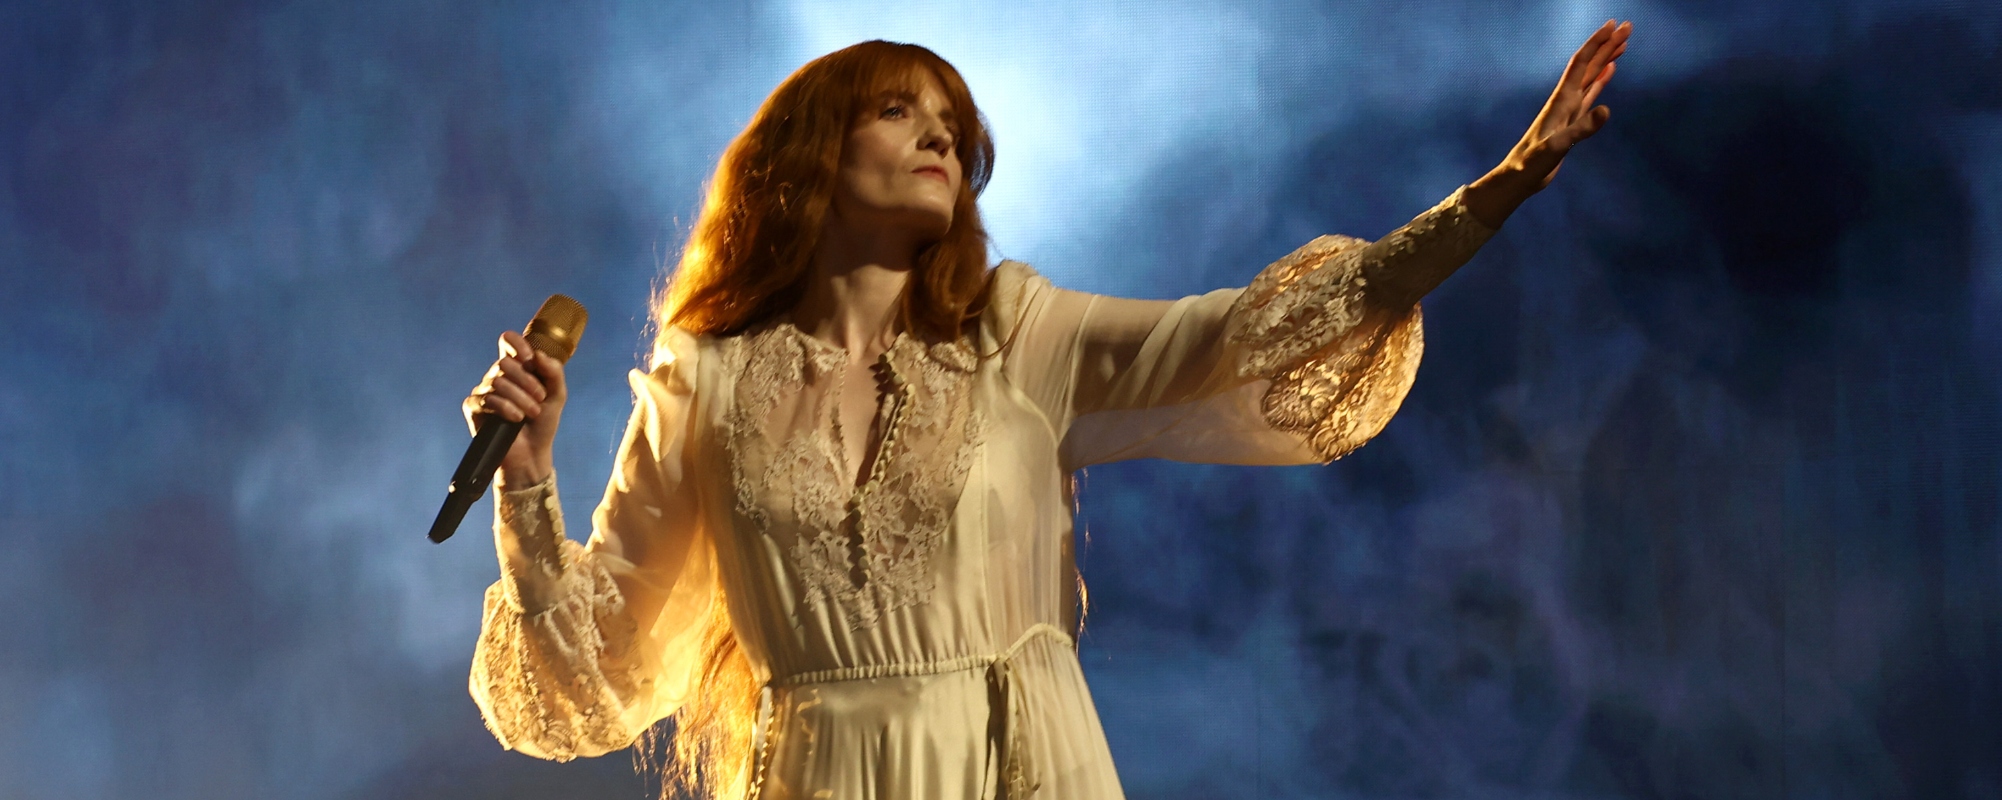 15 Years Of ‘Lungs’: Florence + The Machine to Play Album in Full at Orchestral London Show